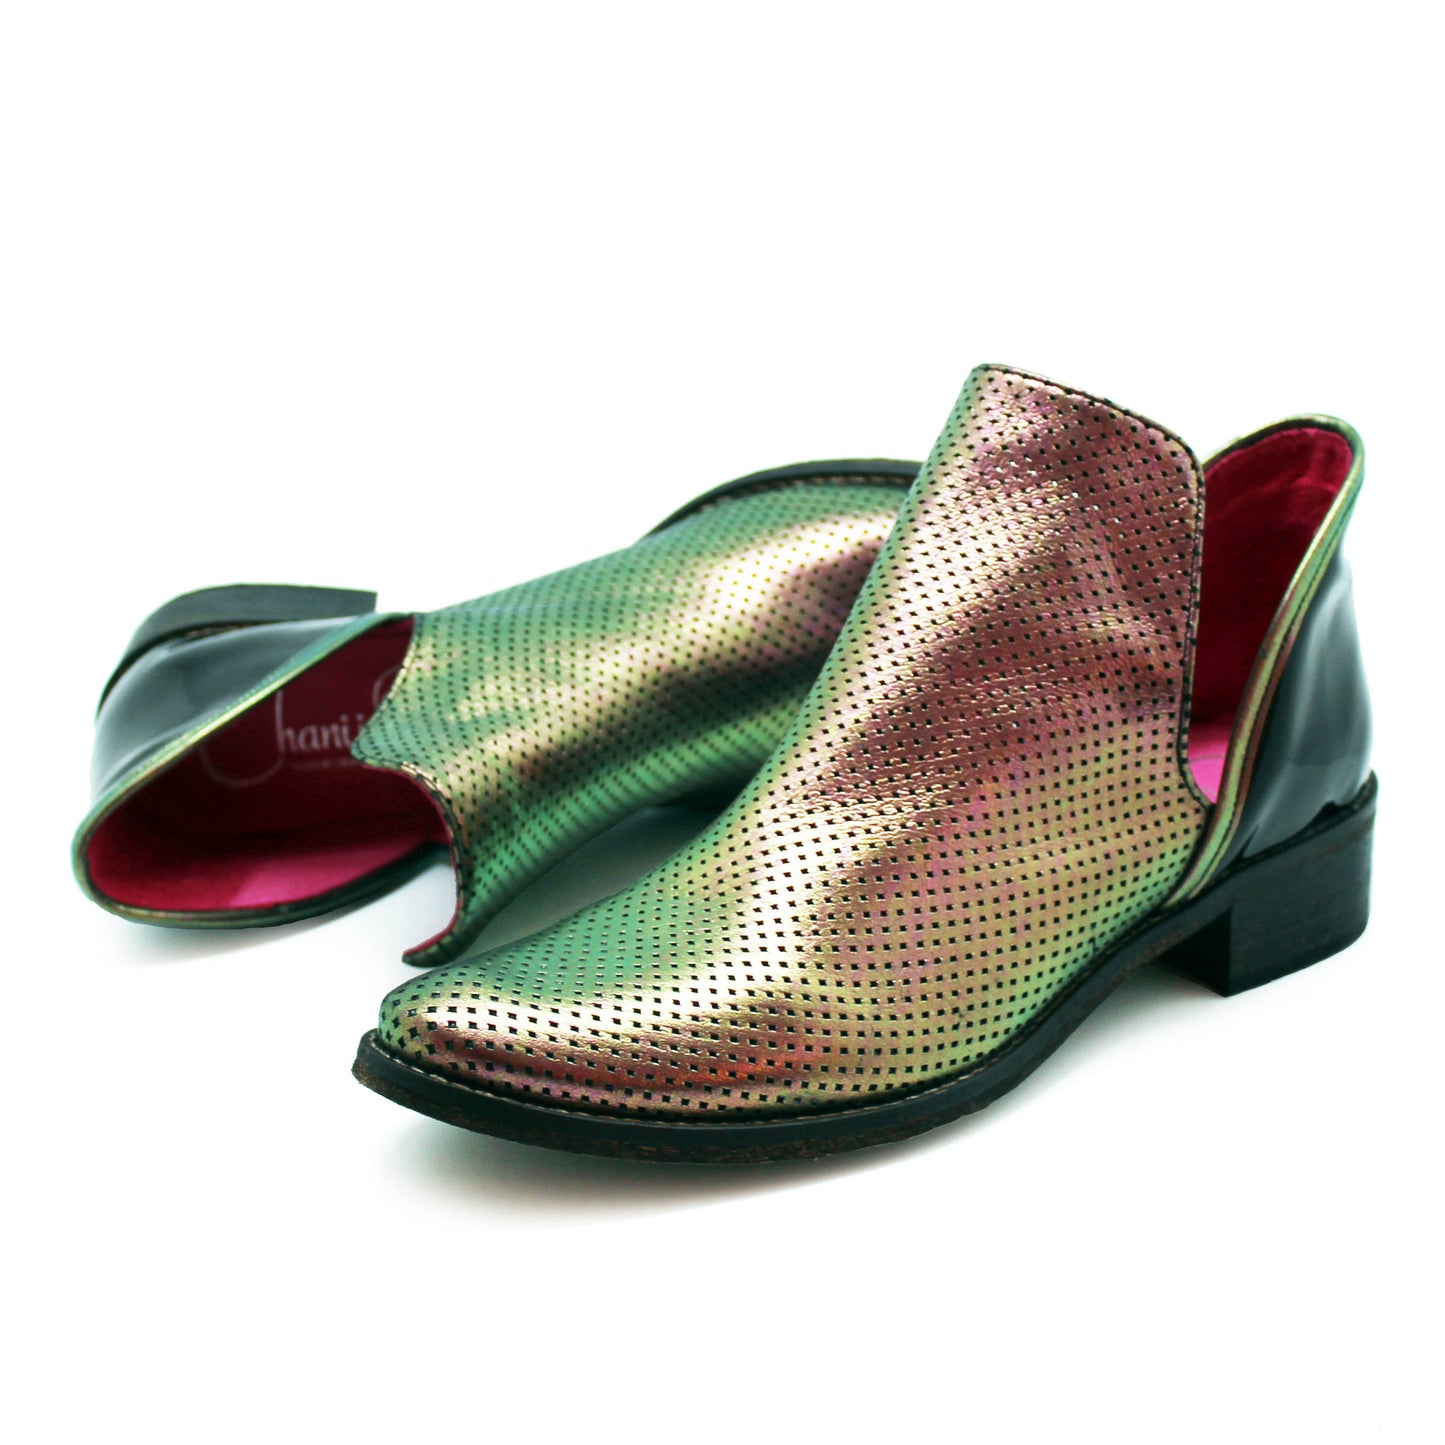 Zippette - Iridescent ankle boot